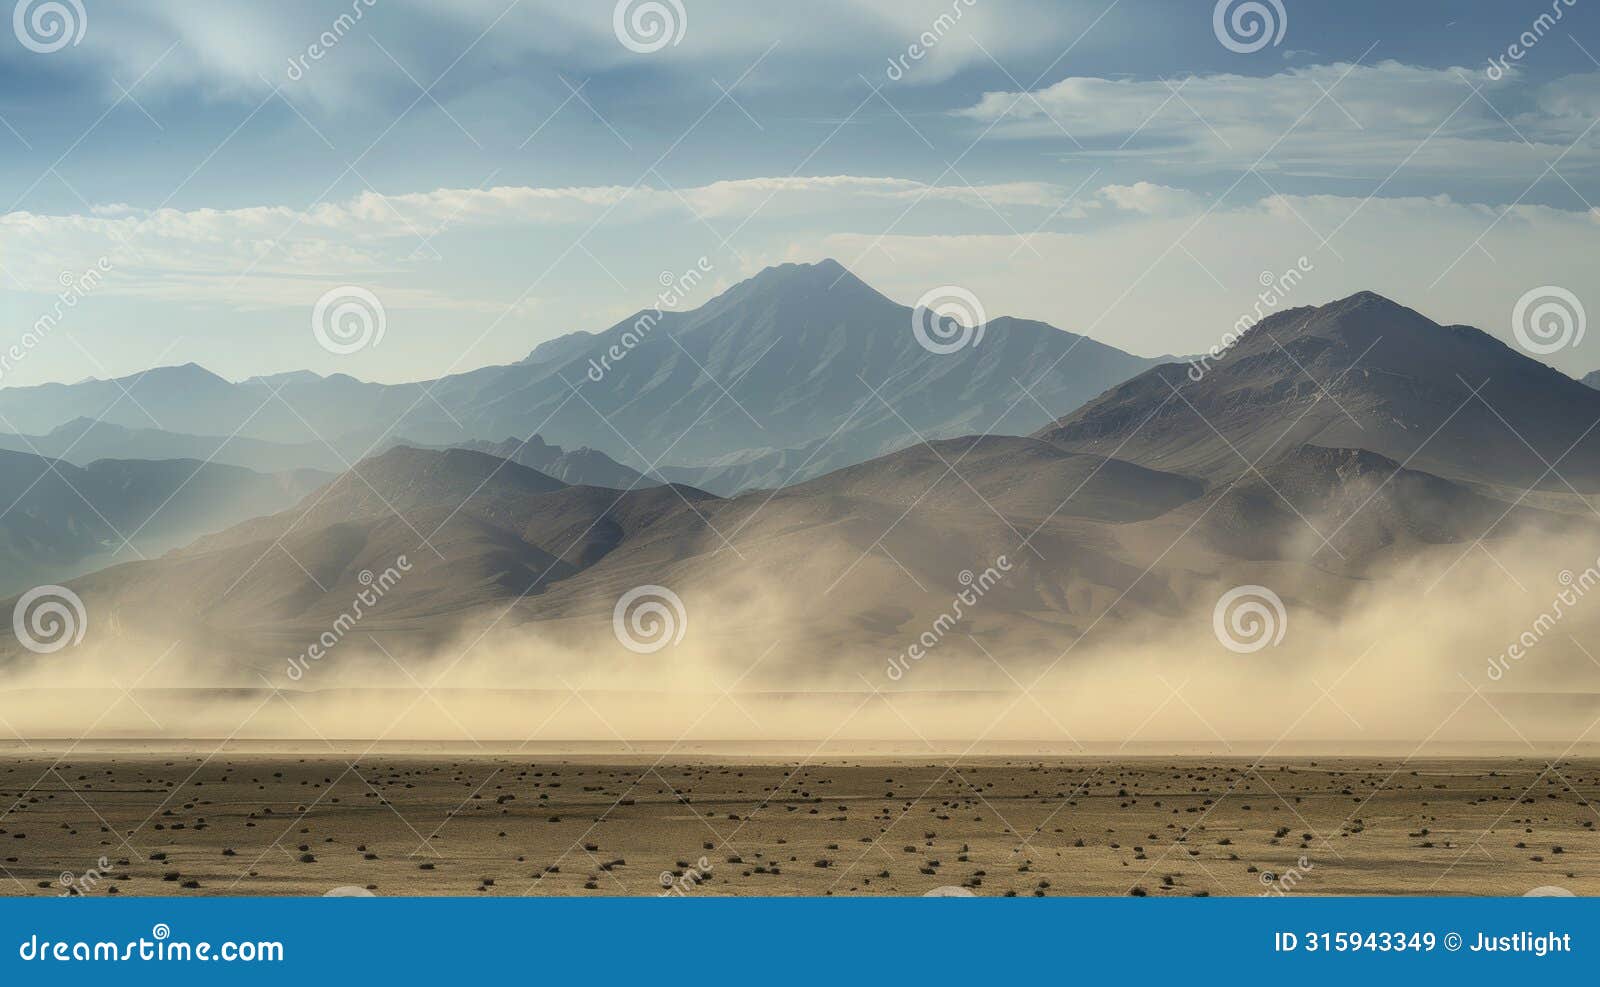 a jagged mountain range looms in the distance shrouded in a thick layer of swirling dust and sand.